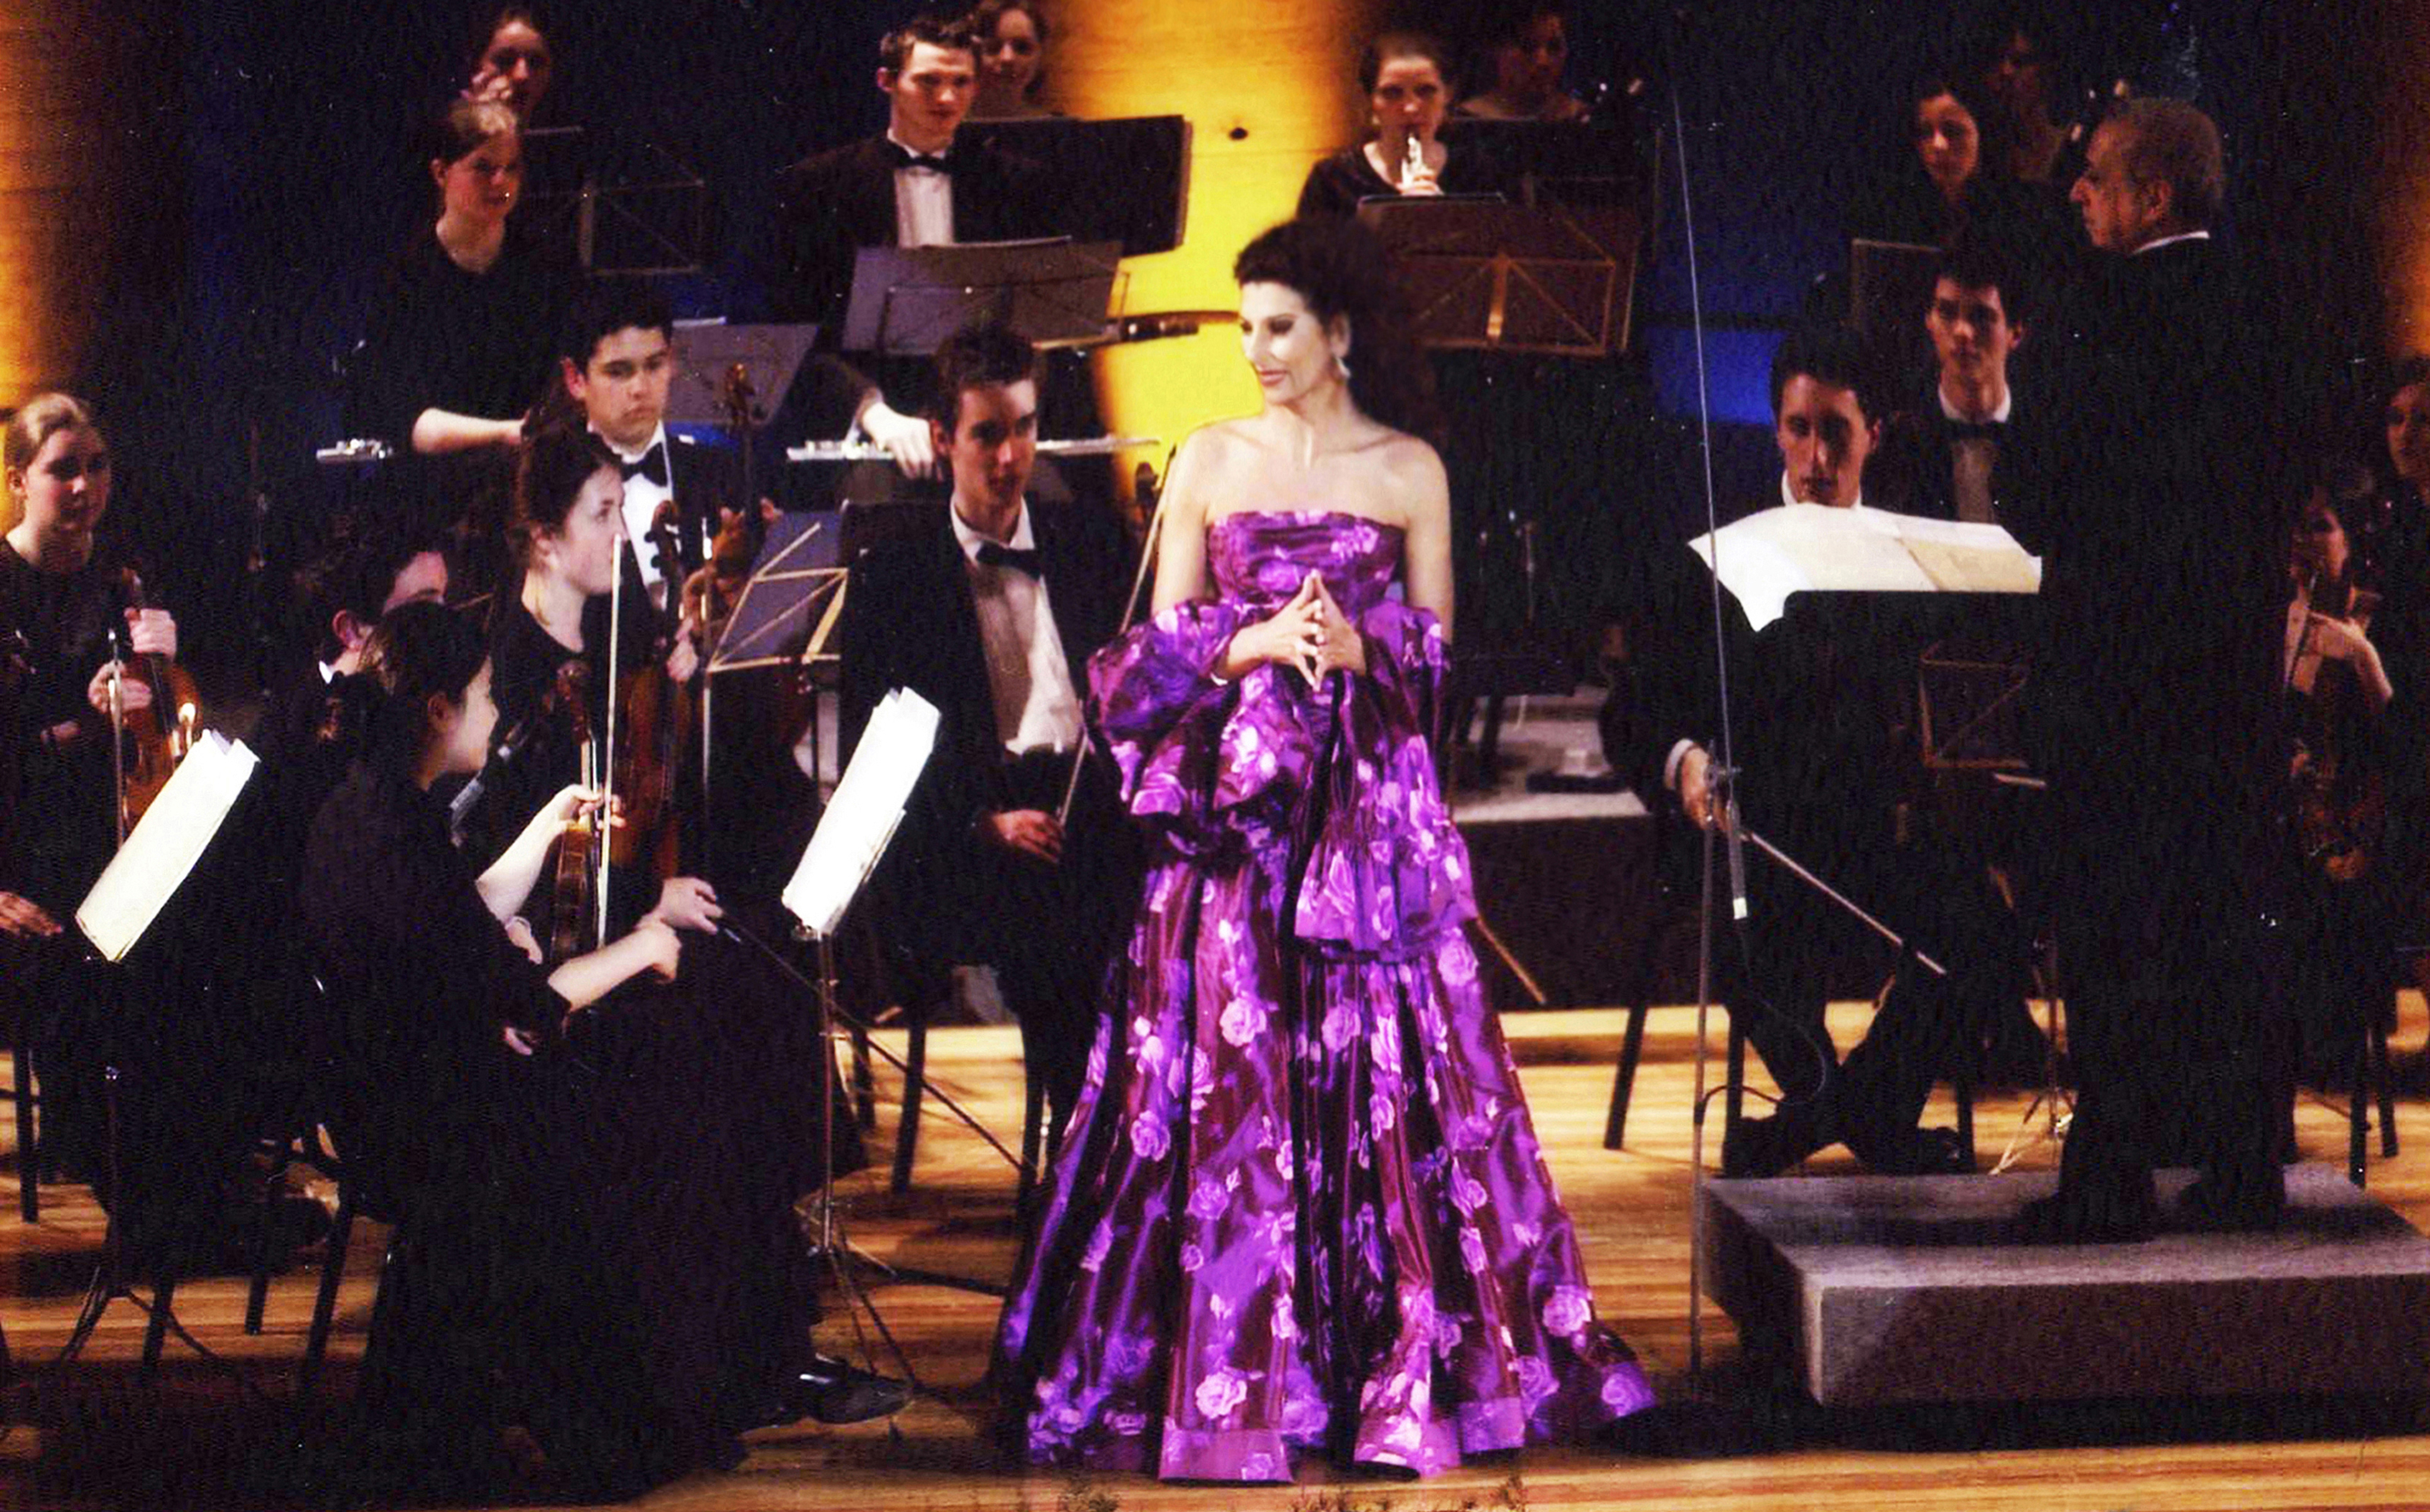 Lucia Aliberti with the conductor Lawrence Foster⚘Special Gala Concert⚘In Honor of Prince Charles of England⚘Théâtre des Nations⚘Paris⚘Purcell School Orchestra⚘Unesco⚘Photo taken from the Newspaper⚘Escada Fashion⚘:http://www.luciaaliberti.it #luciaaliberti #lawrencefoster #théâtredesnations #paris #galaconcert #purcellschoolorchestra #inhonorofprincecharlesofengland #unesco #escadafashion